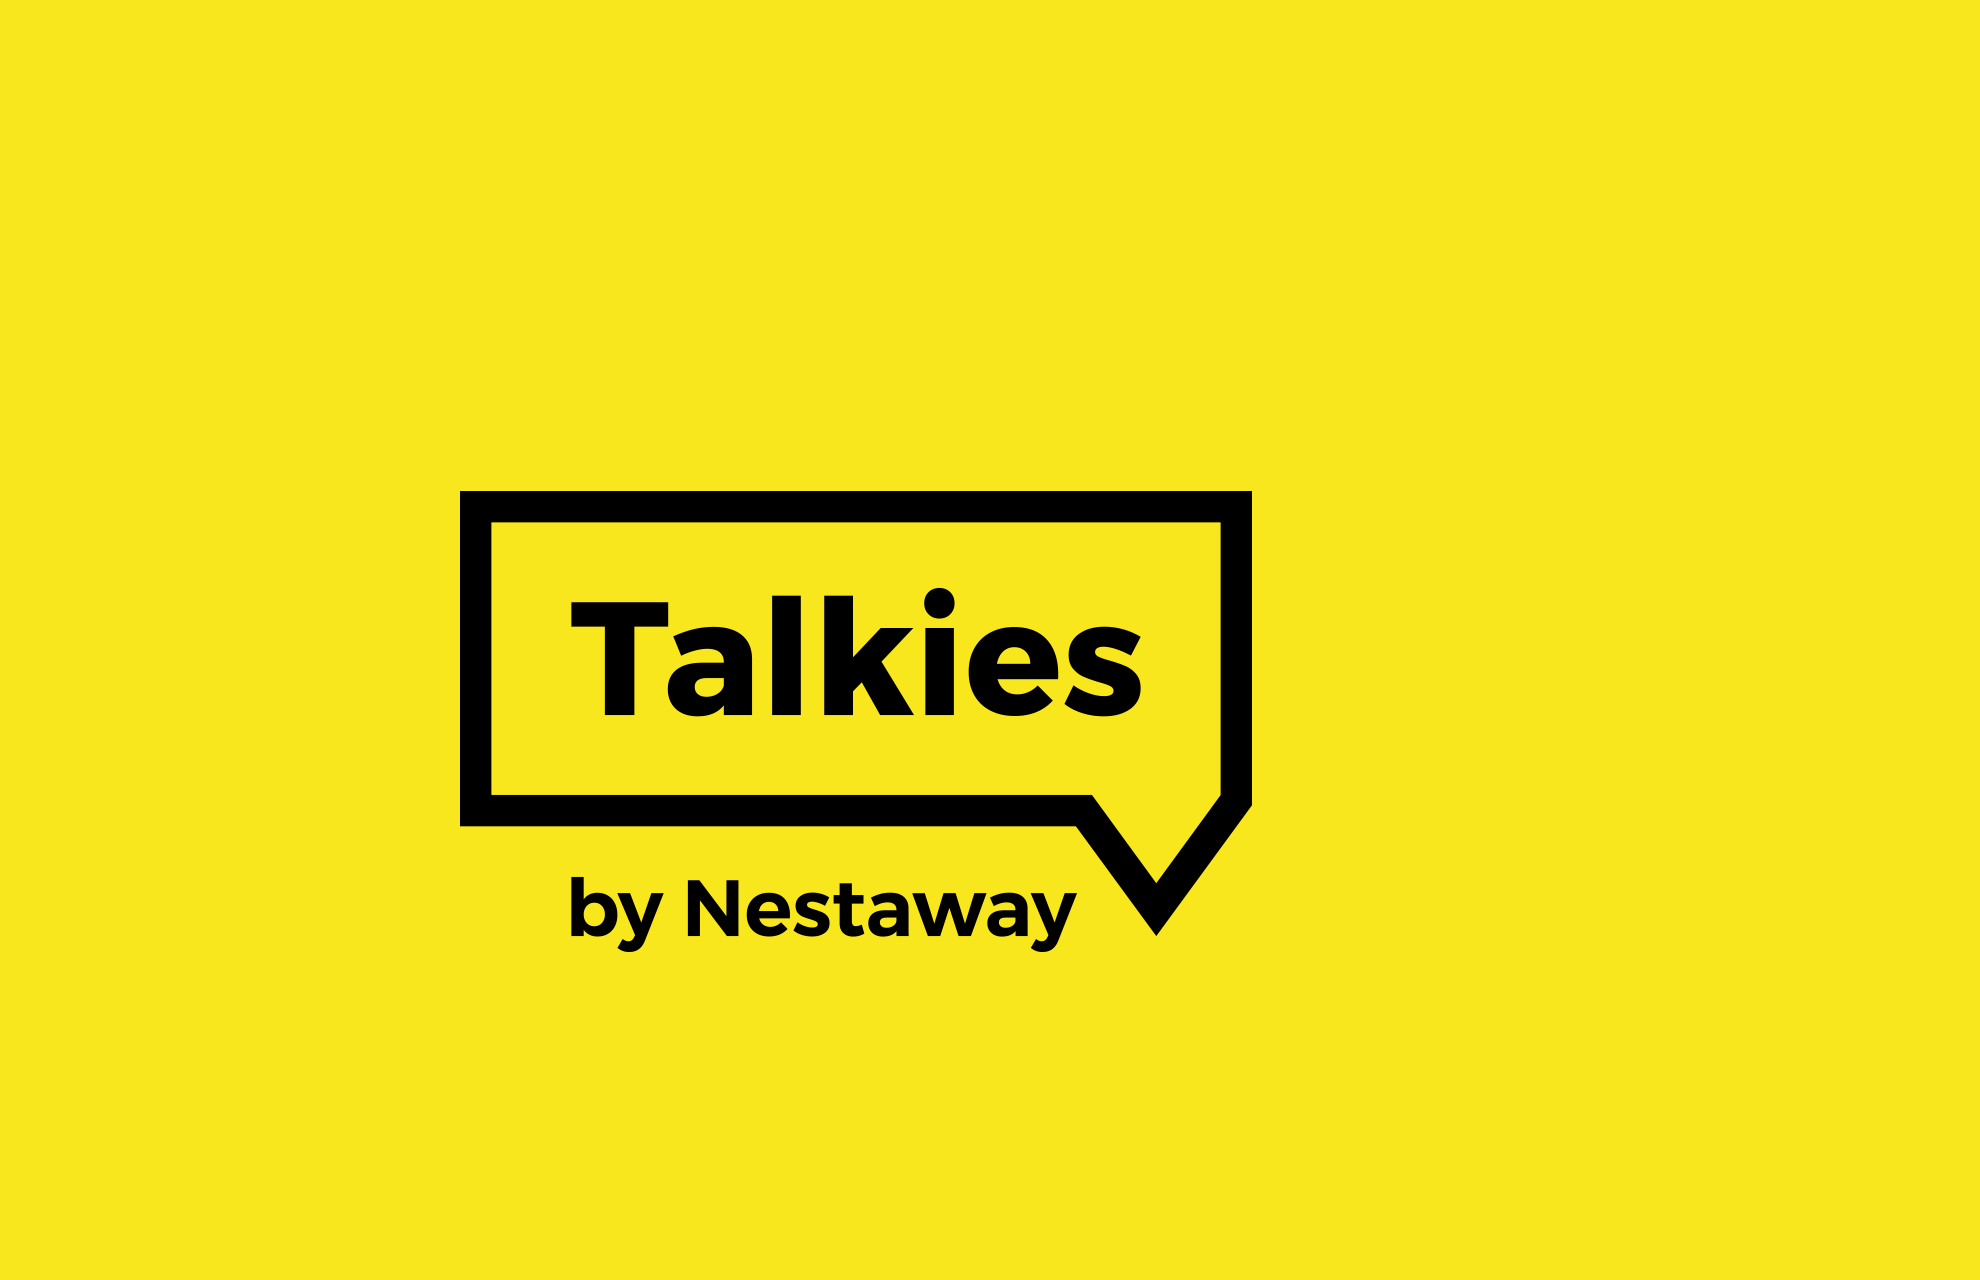 New Logo and Identity for Nestaway by Lopez Design